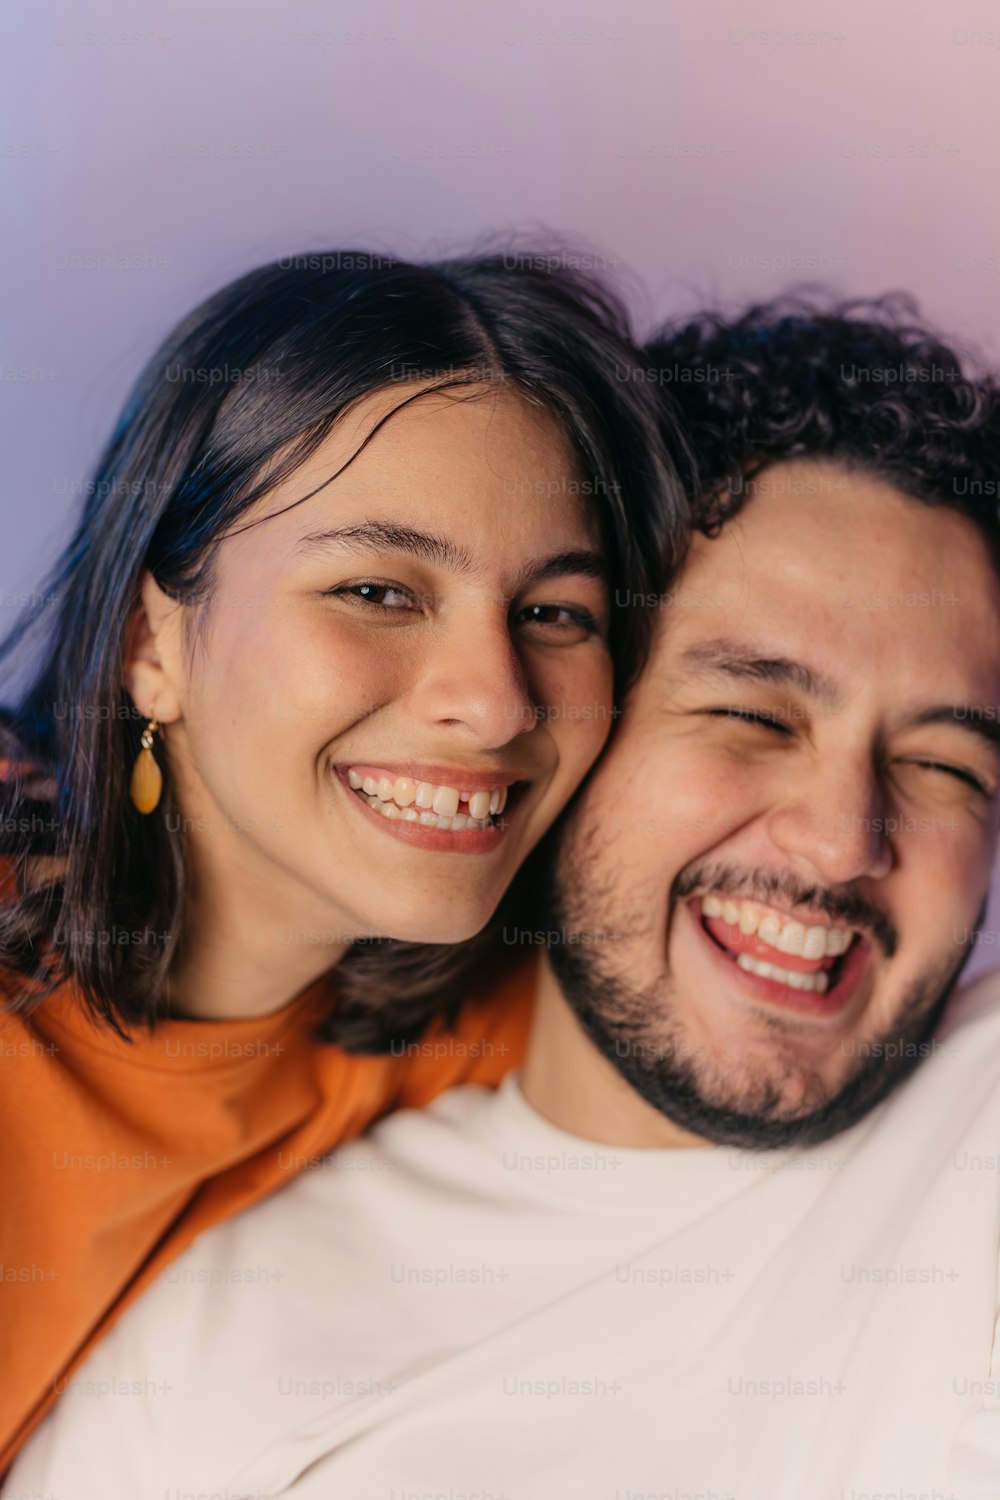 a man and a woman are smiling for the camera